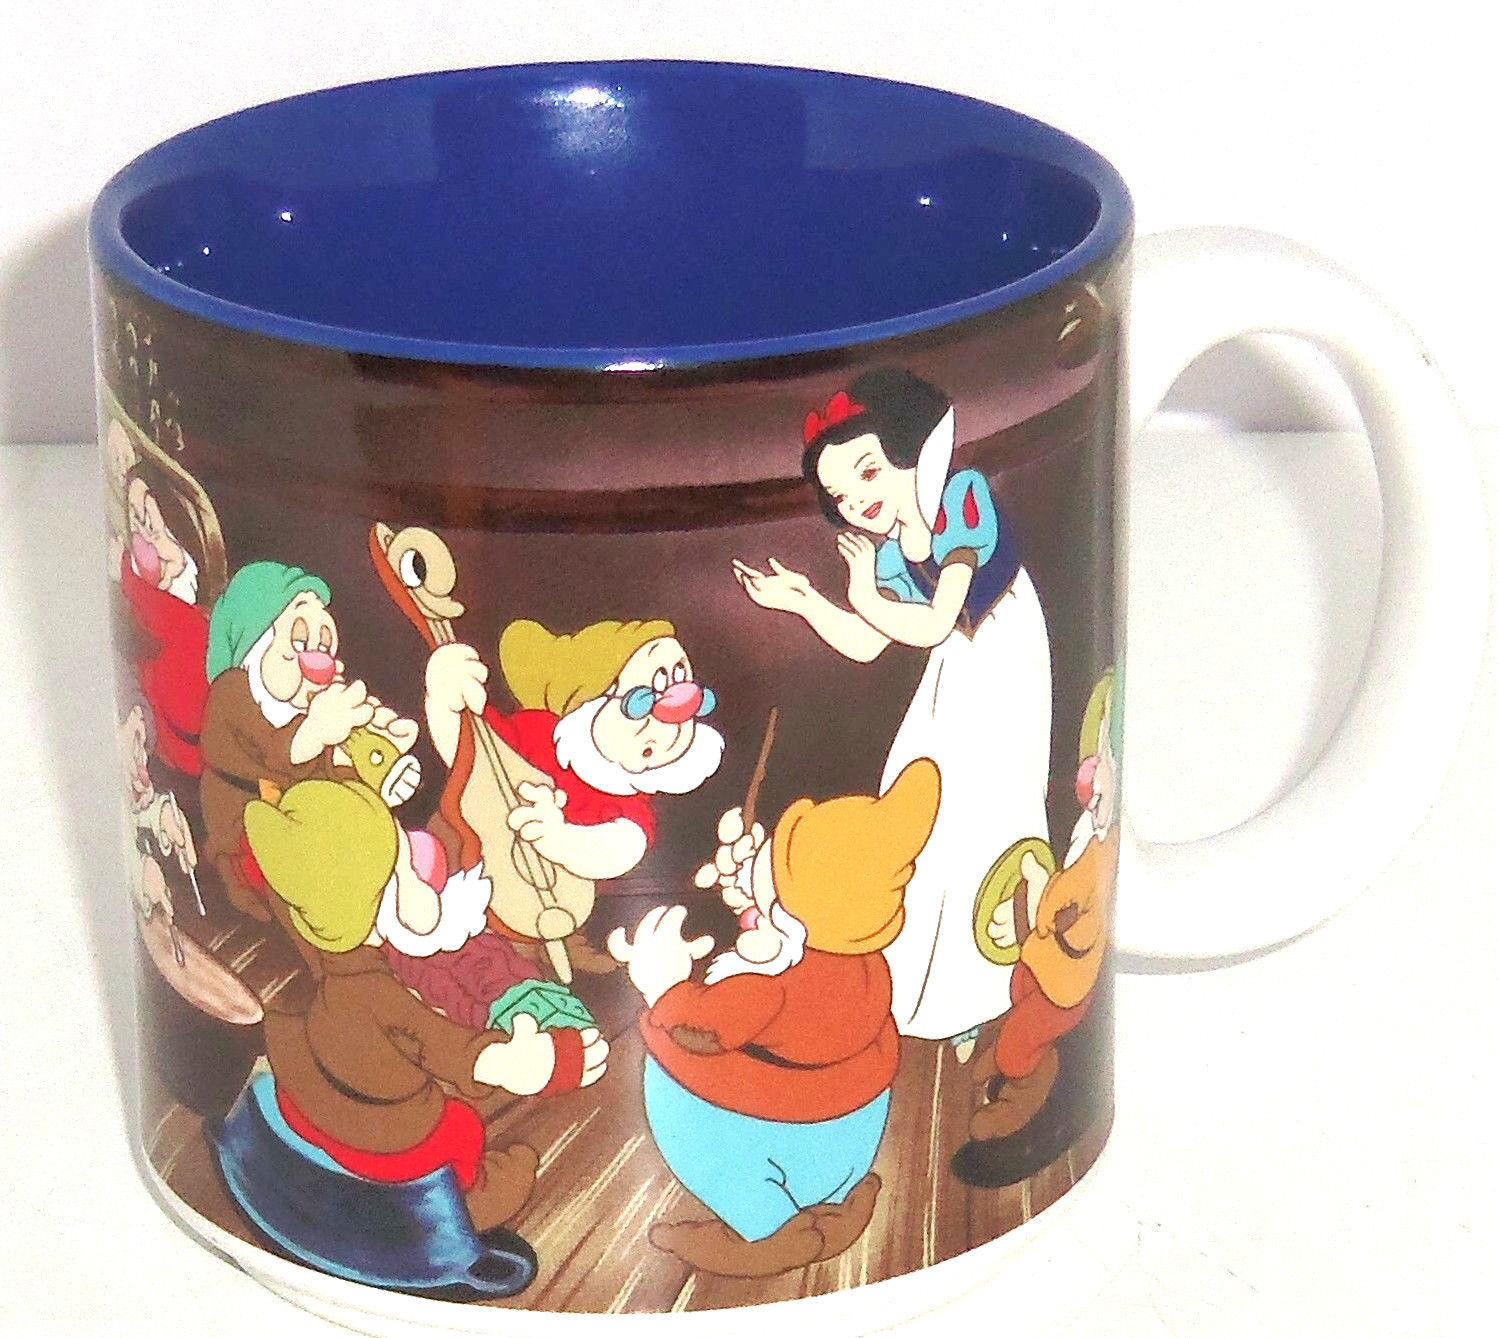 OFFICIAL DISNEY SNOW WHITE THE SEVEN DWARFS HAPPY MUG COFFEE CUP NEW IN GIFT BOX 